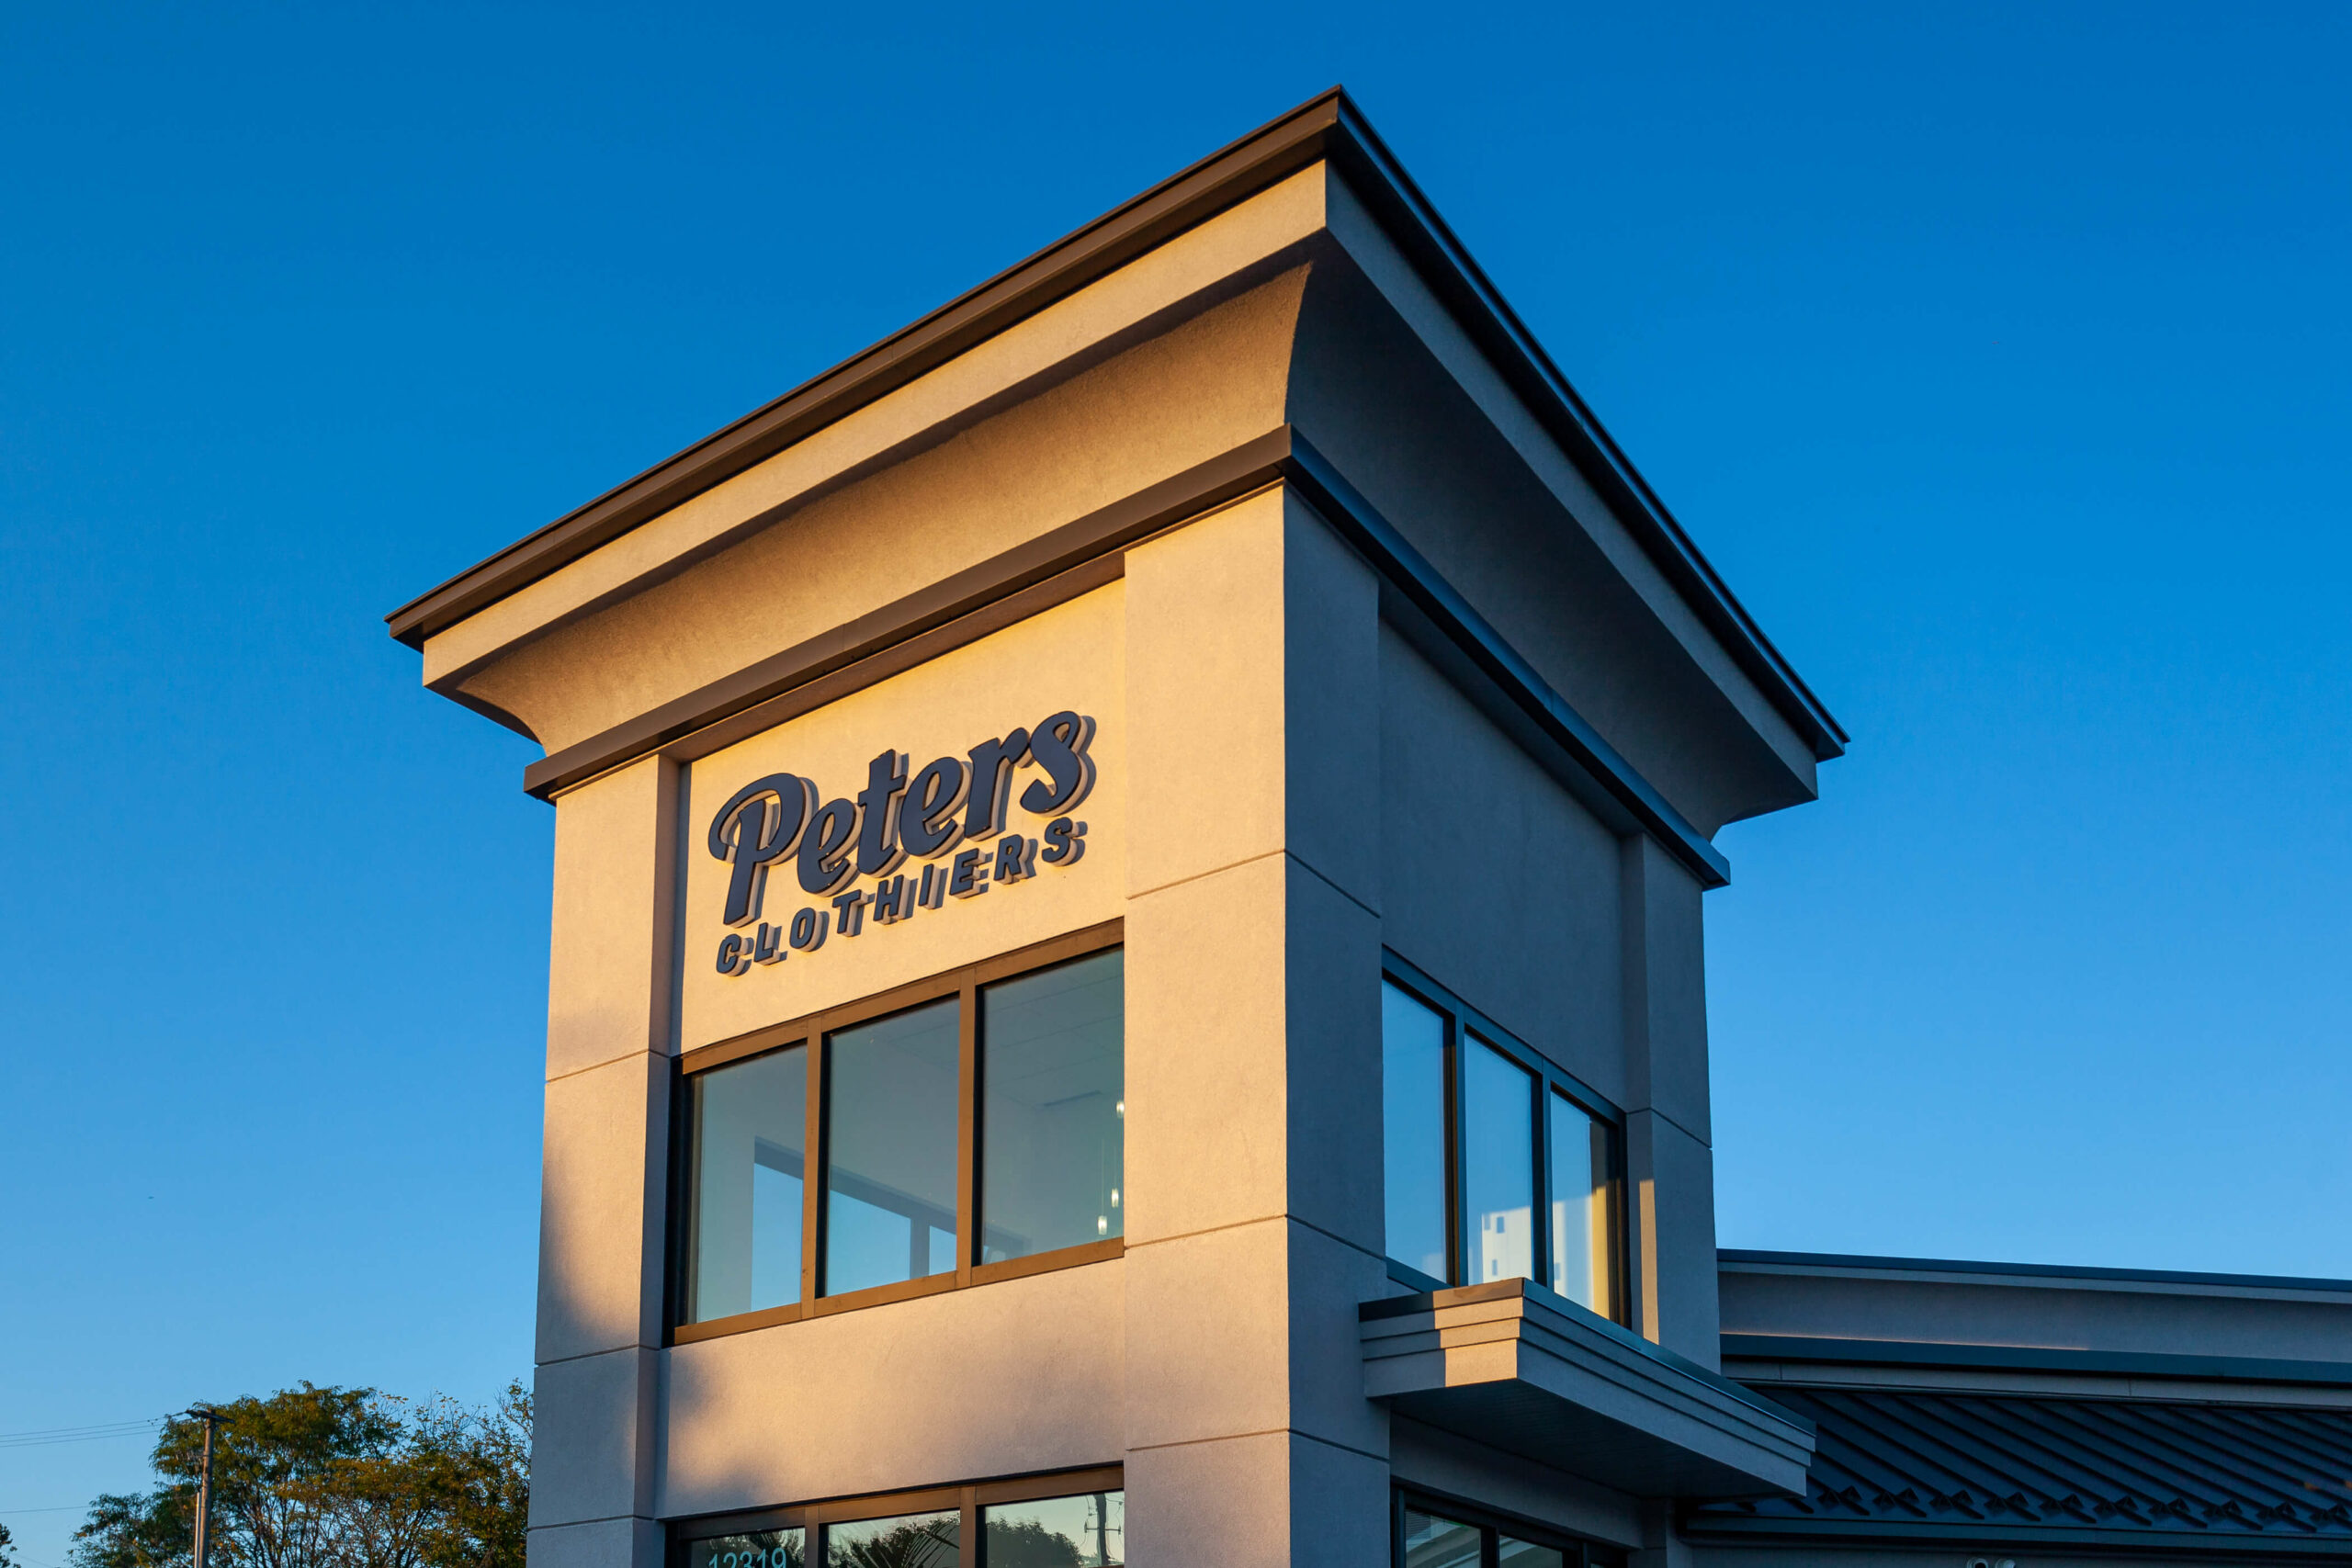 Peters Clothiers 1